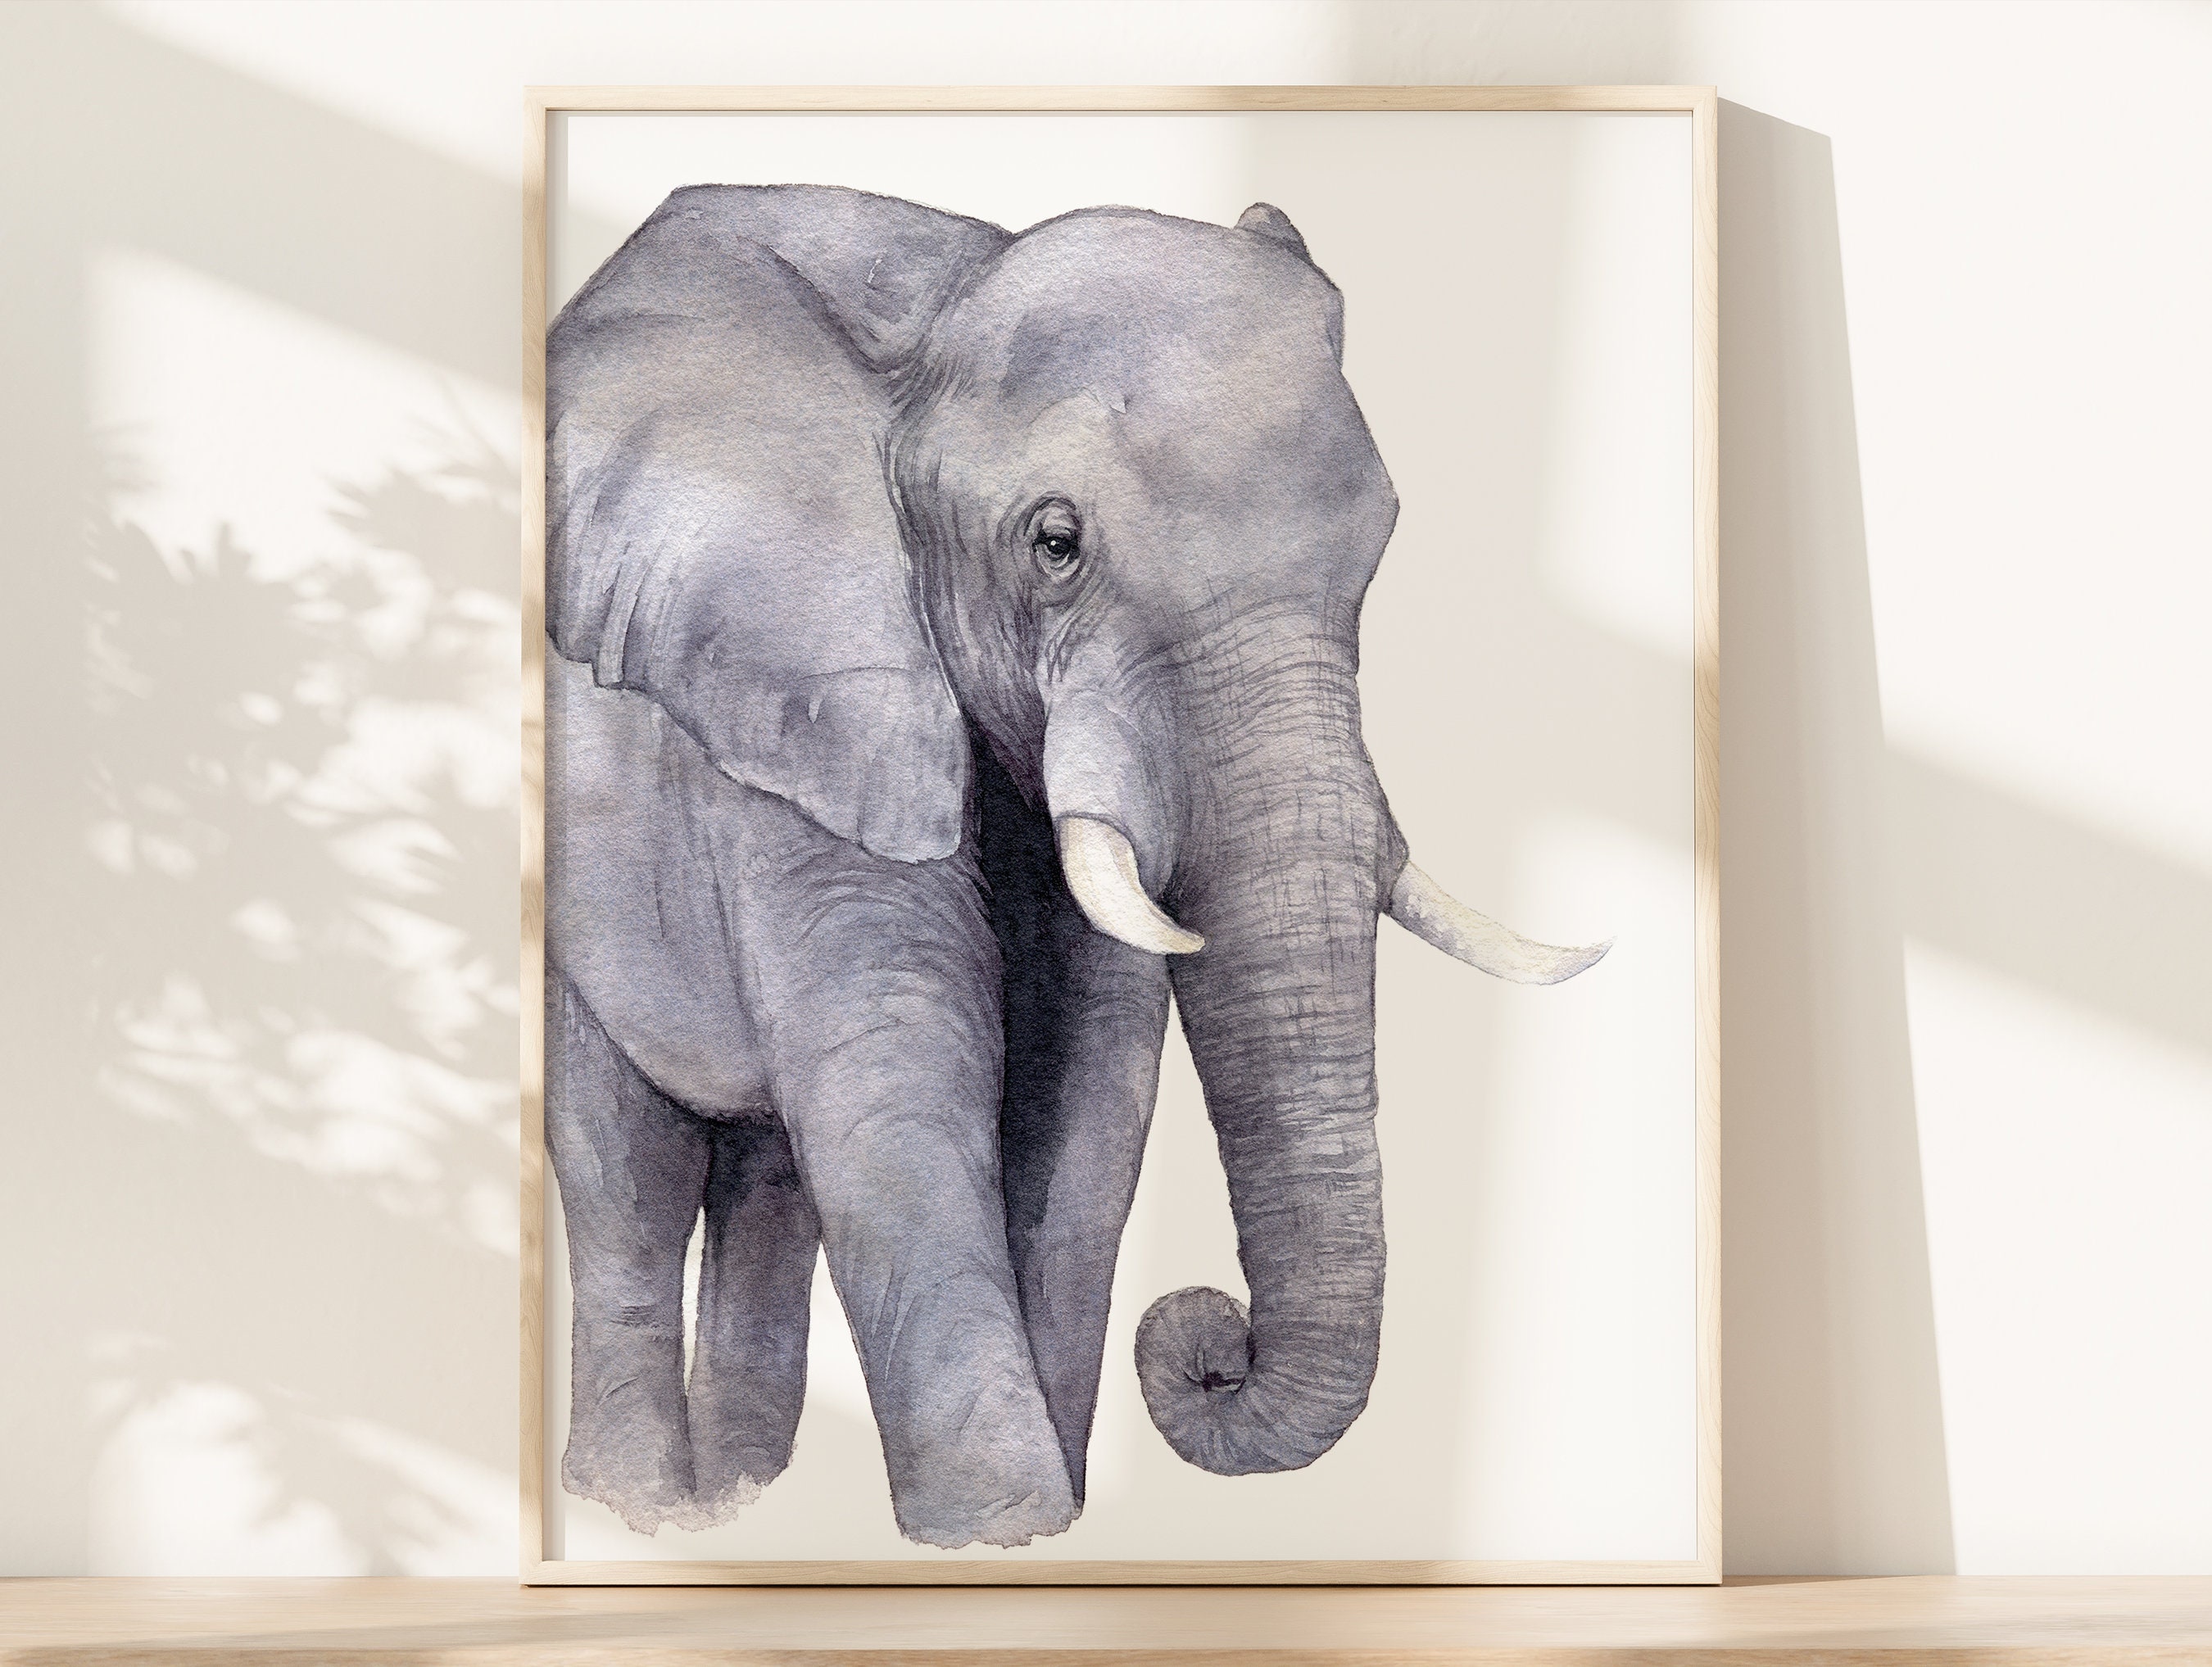 water color painting chino the elephant | www.esn-ub.org